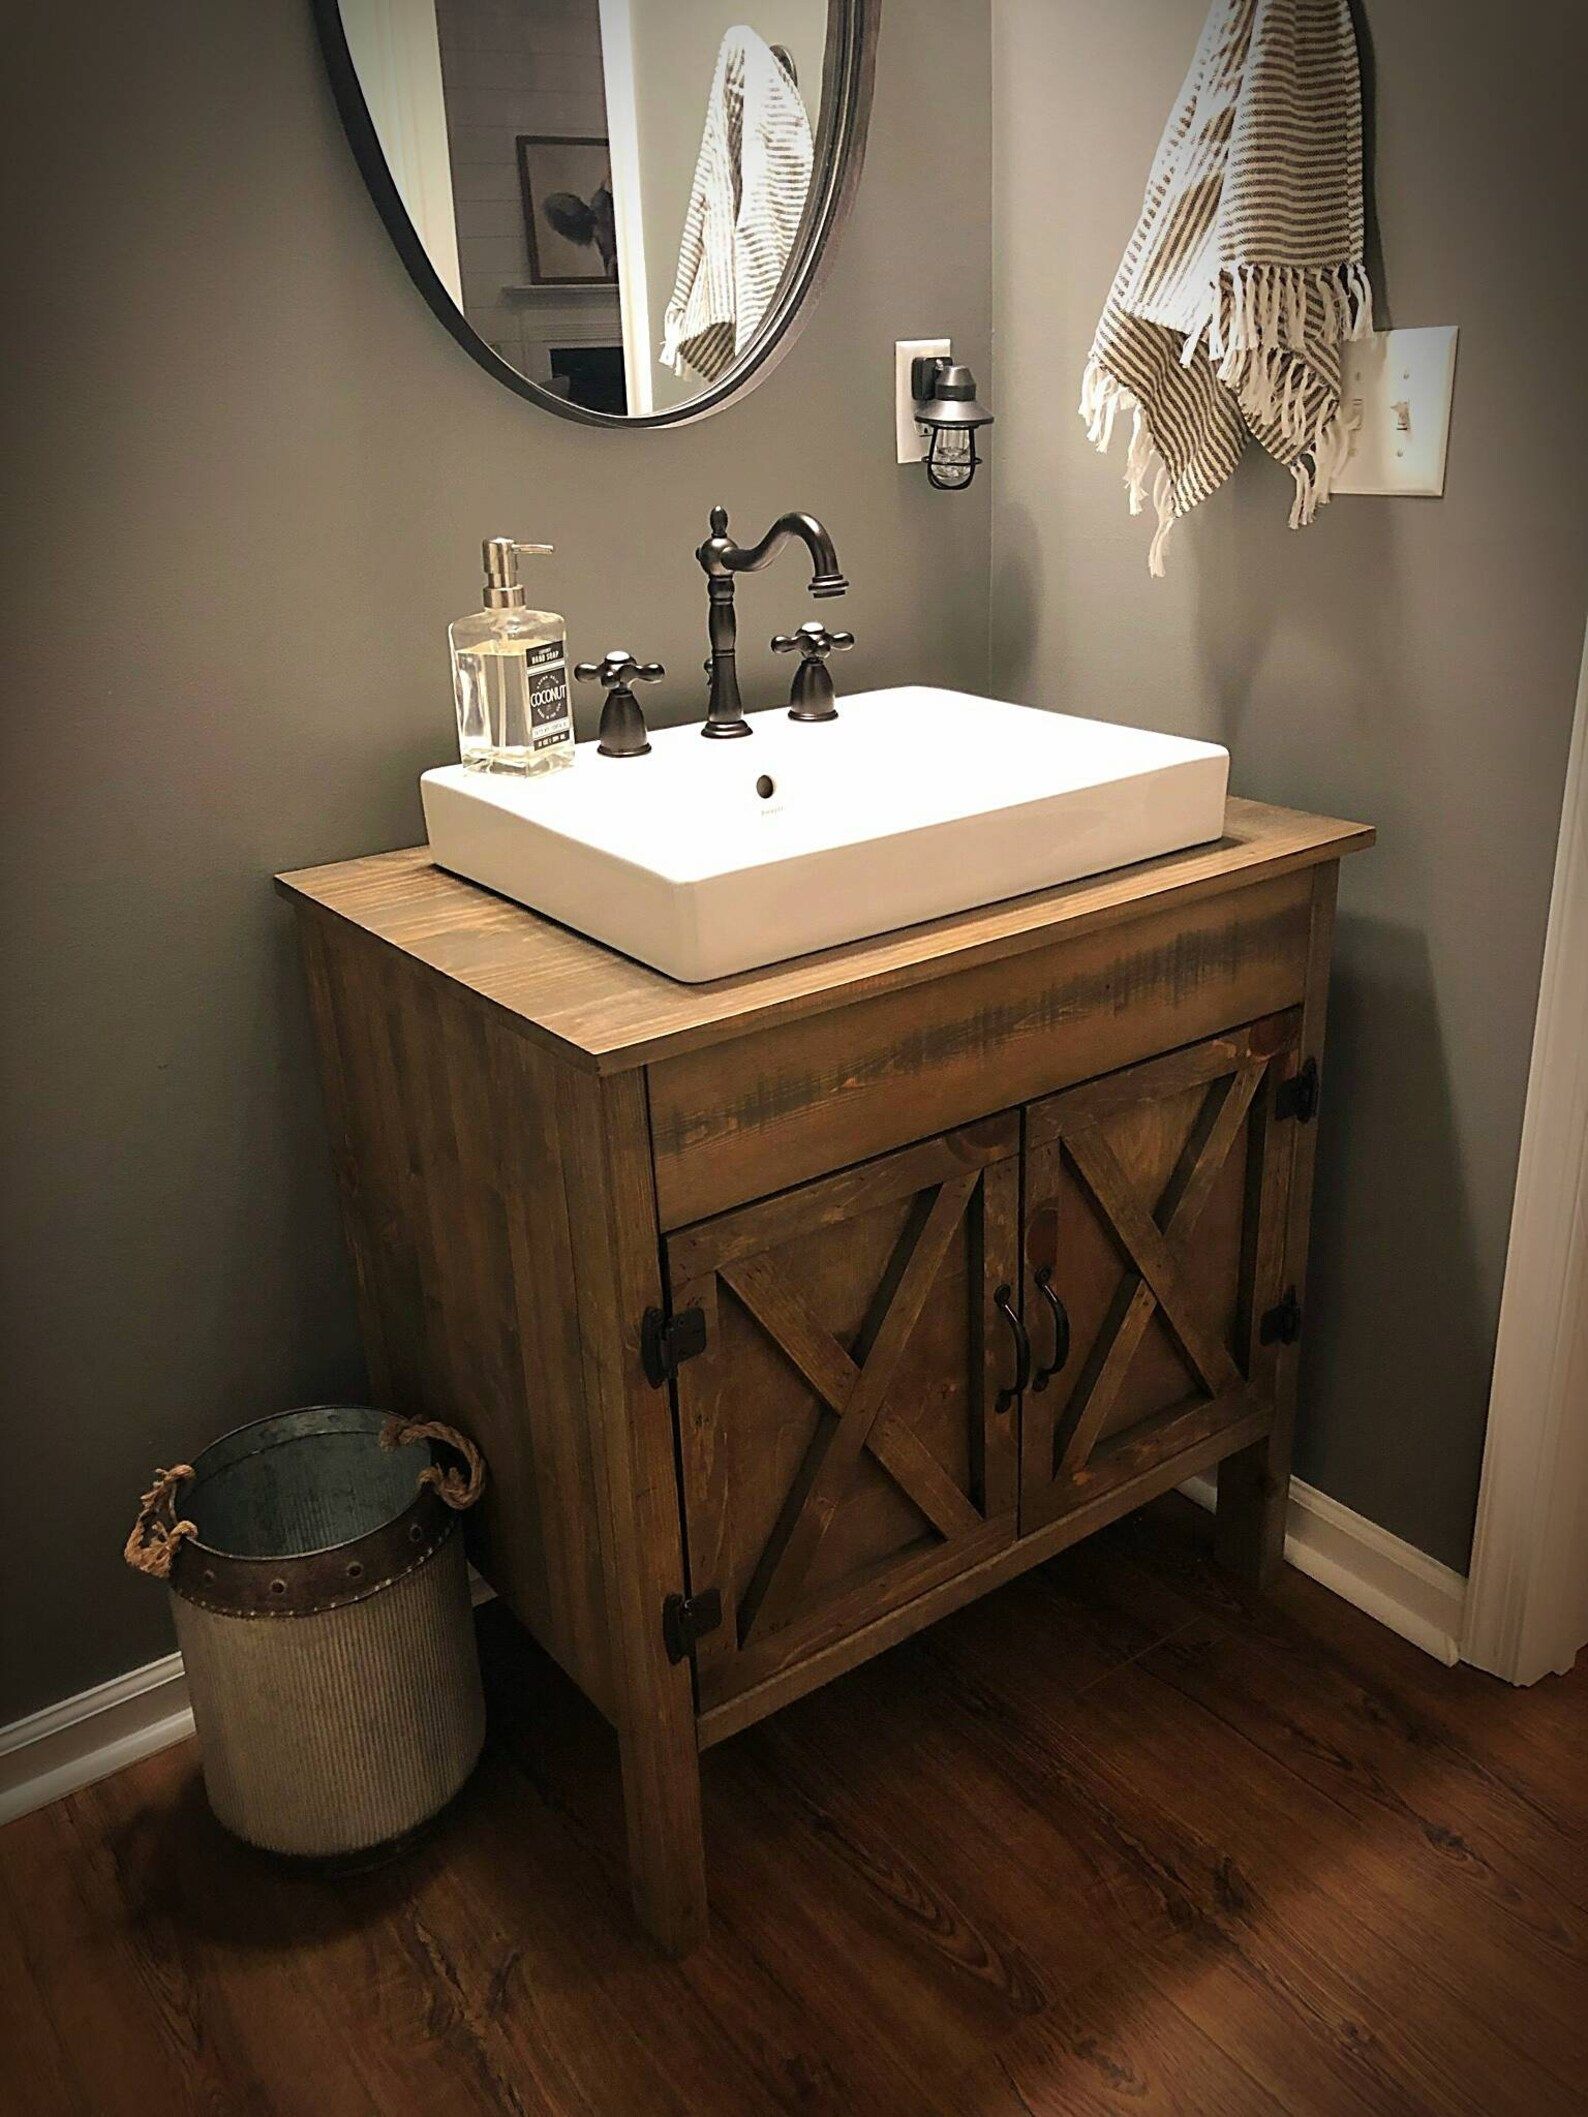 Charming Rustic Bathroom Vanities: The Perfect Addition to Your Bathroom Decor